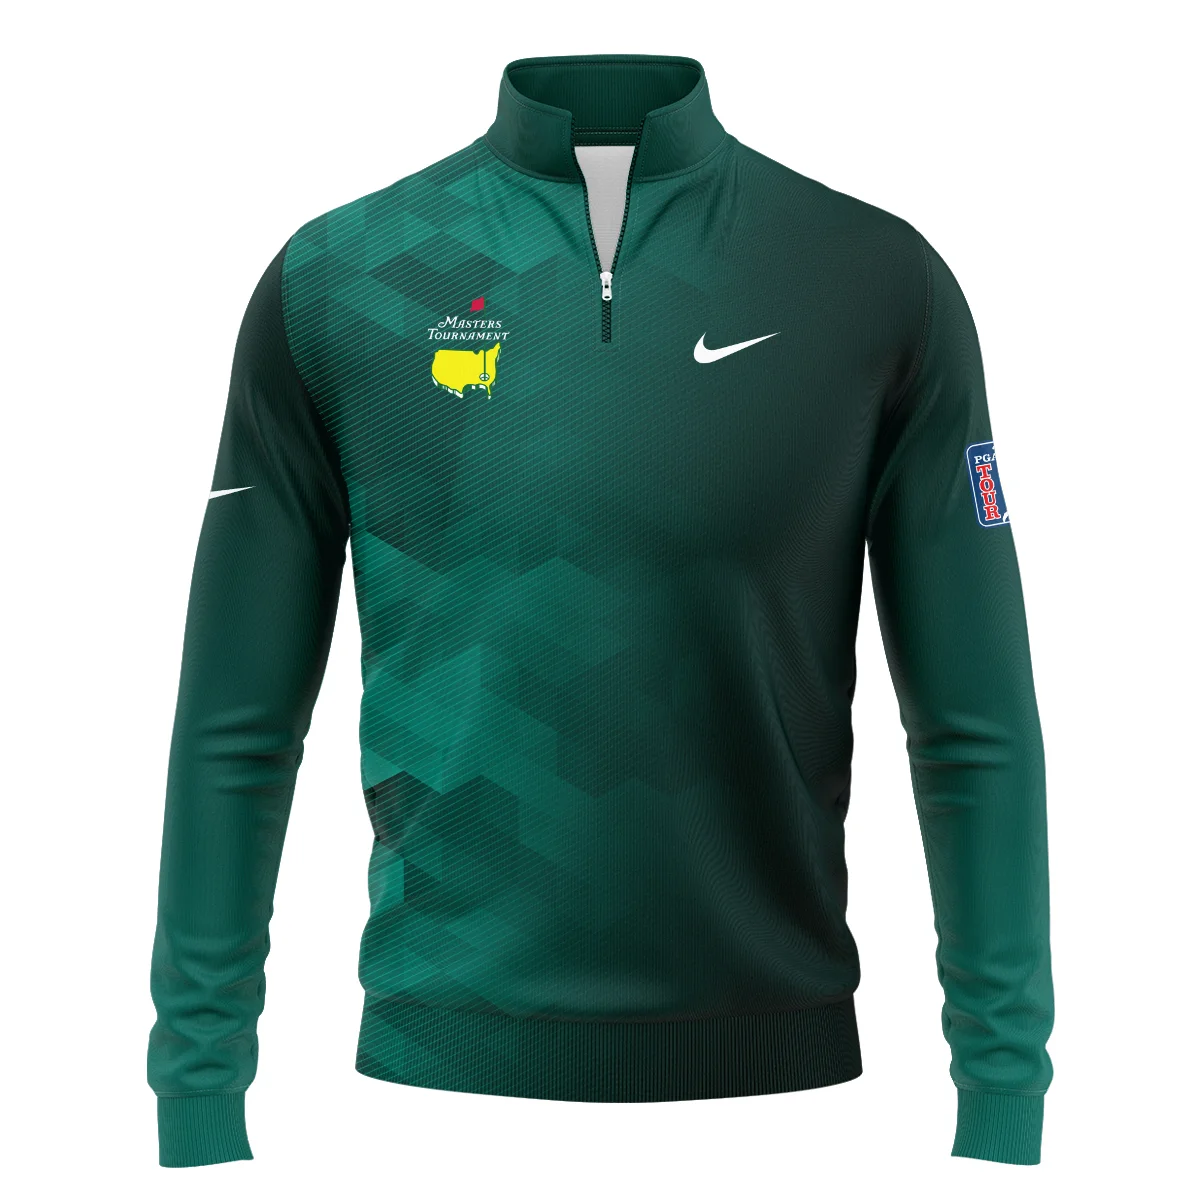 Nike Golf Sport Dark Green Gradient Abstract Background Masters Tournament Vneck Long Polo Shirt Style Classic Long Polo Shirt For Men